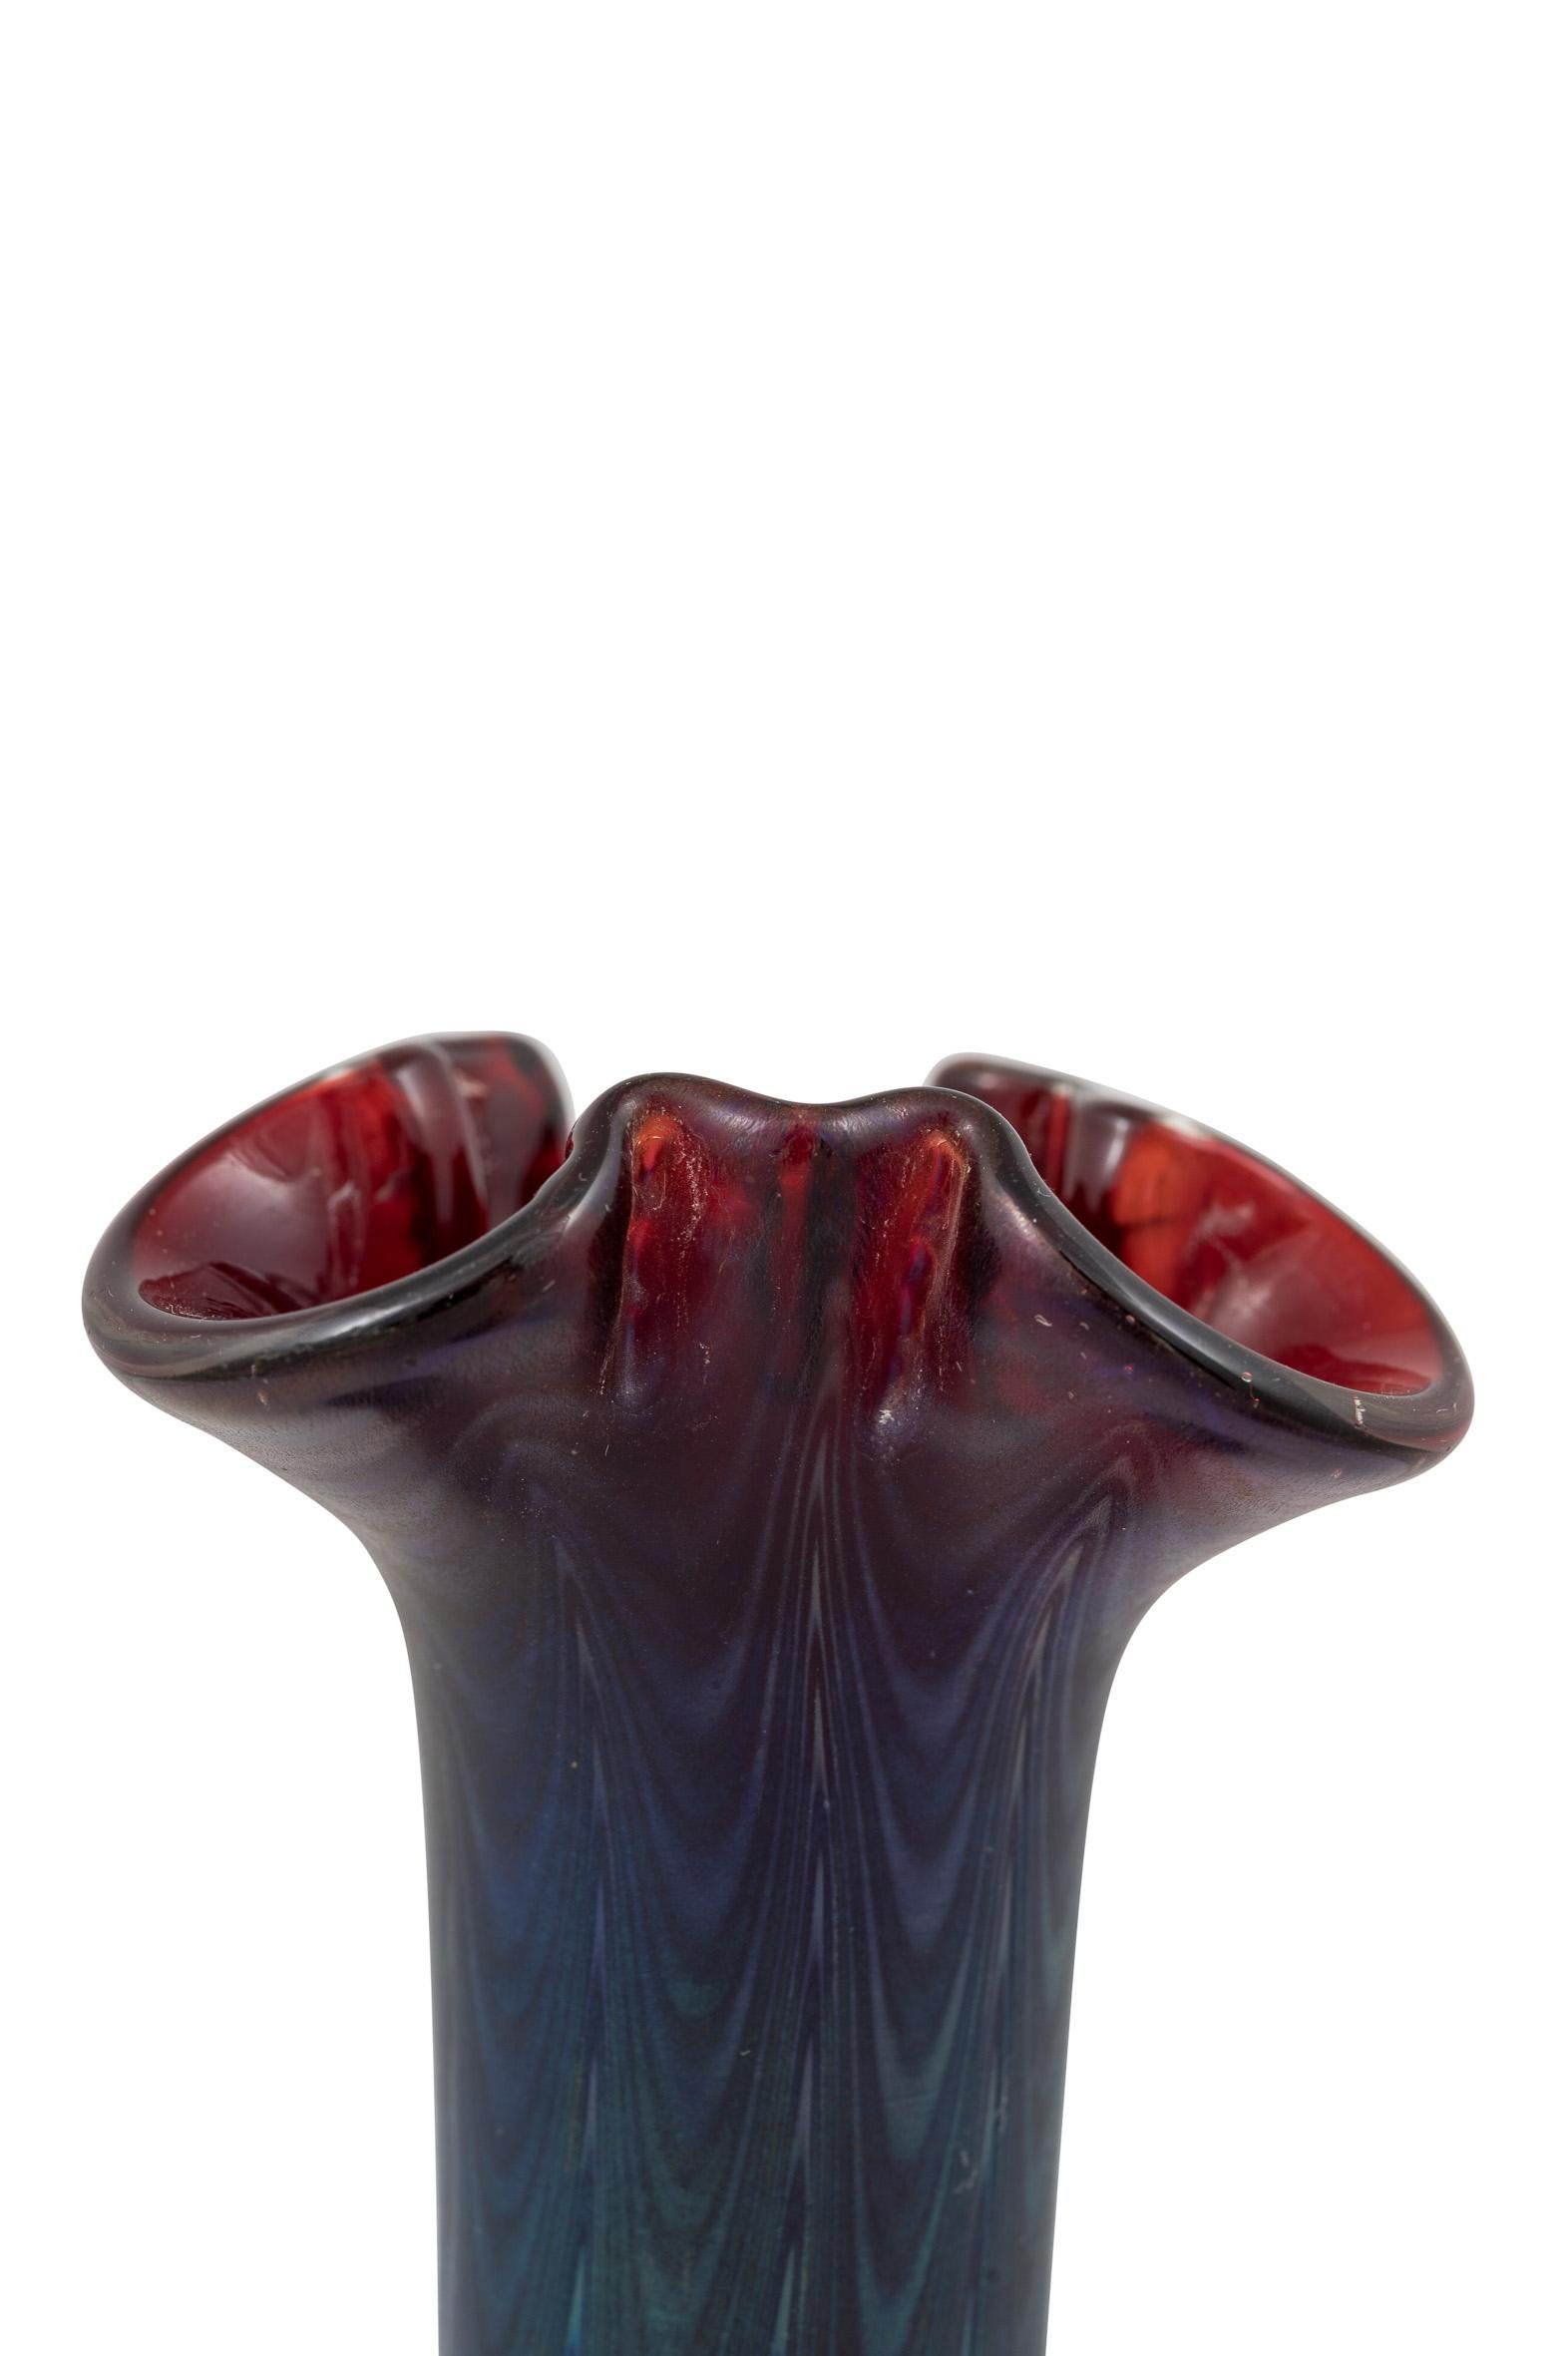 Glass Vase Loetz PG Rubin 6893 Decoration circa 1900 Red Blue Art Nouveau In Good Condition For Sale In Klosterneuburg, AT